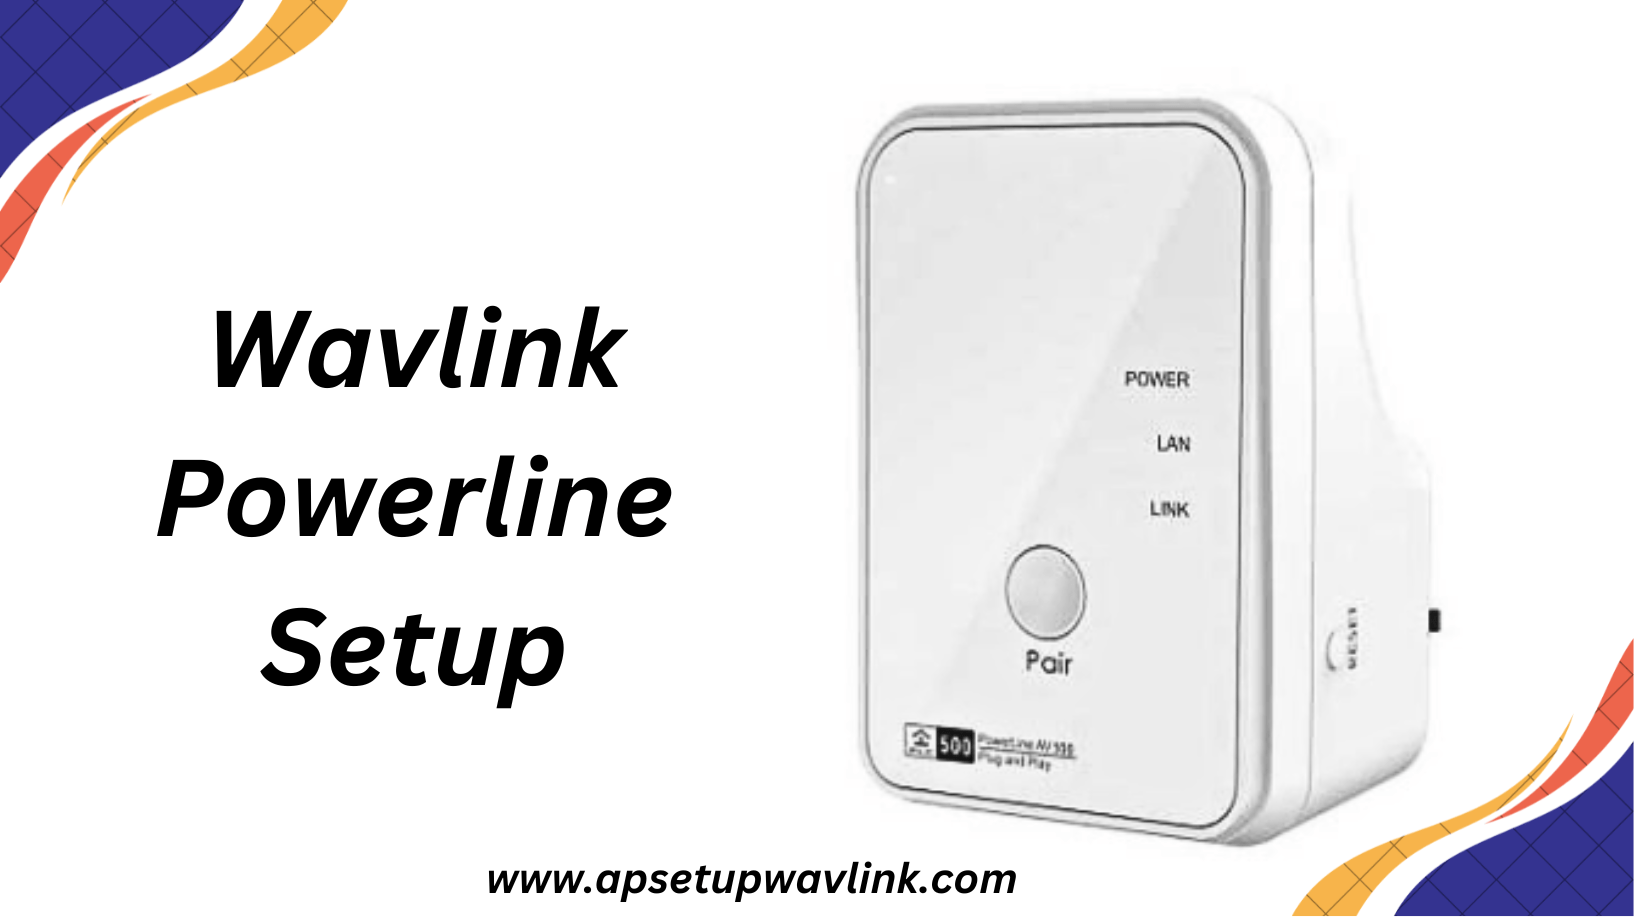 You are currently viewing The Ultimate Wavlink Powerline Setup Tutorial for Beginners